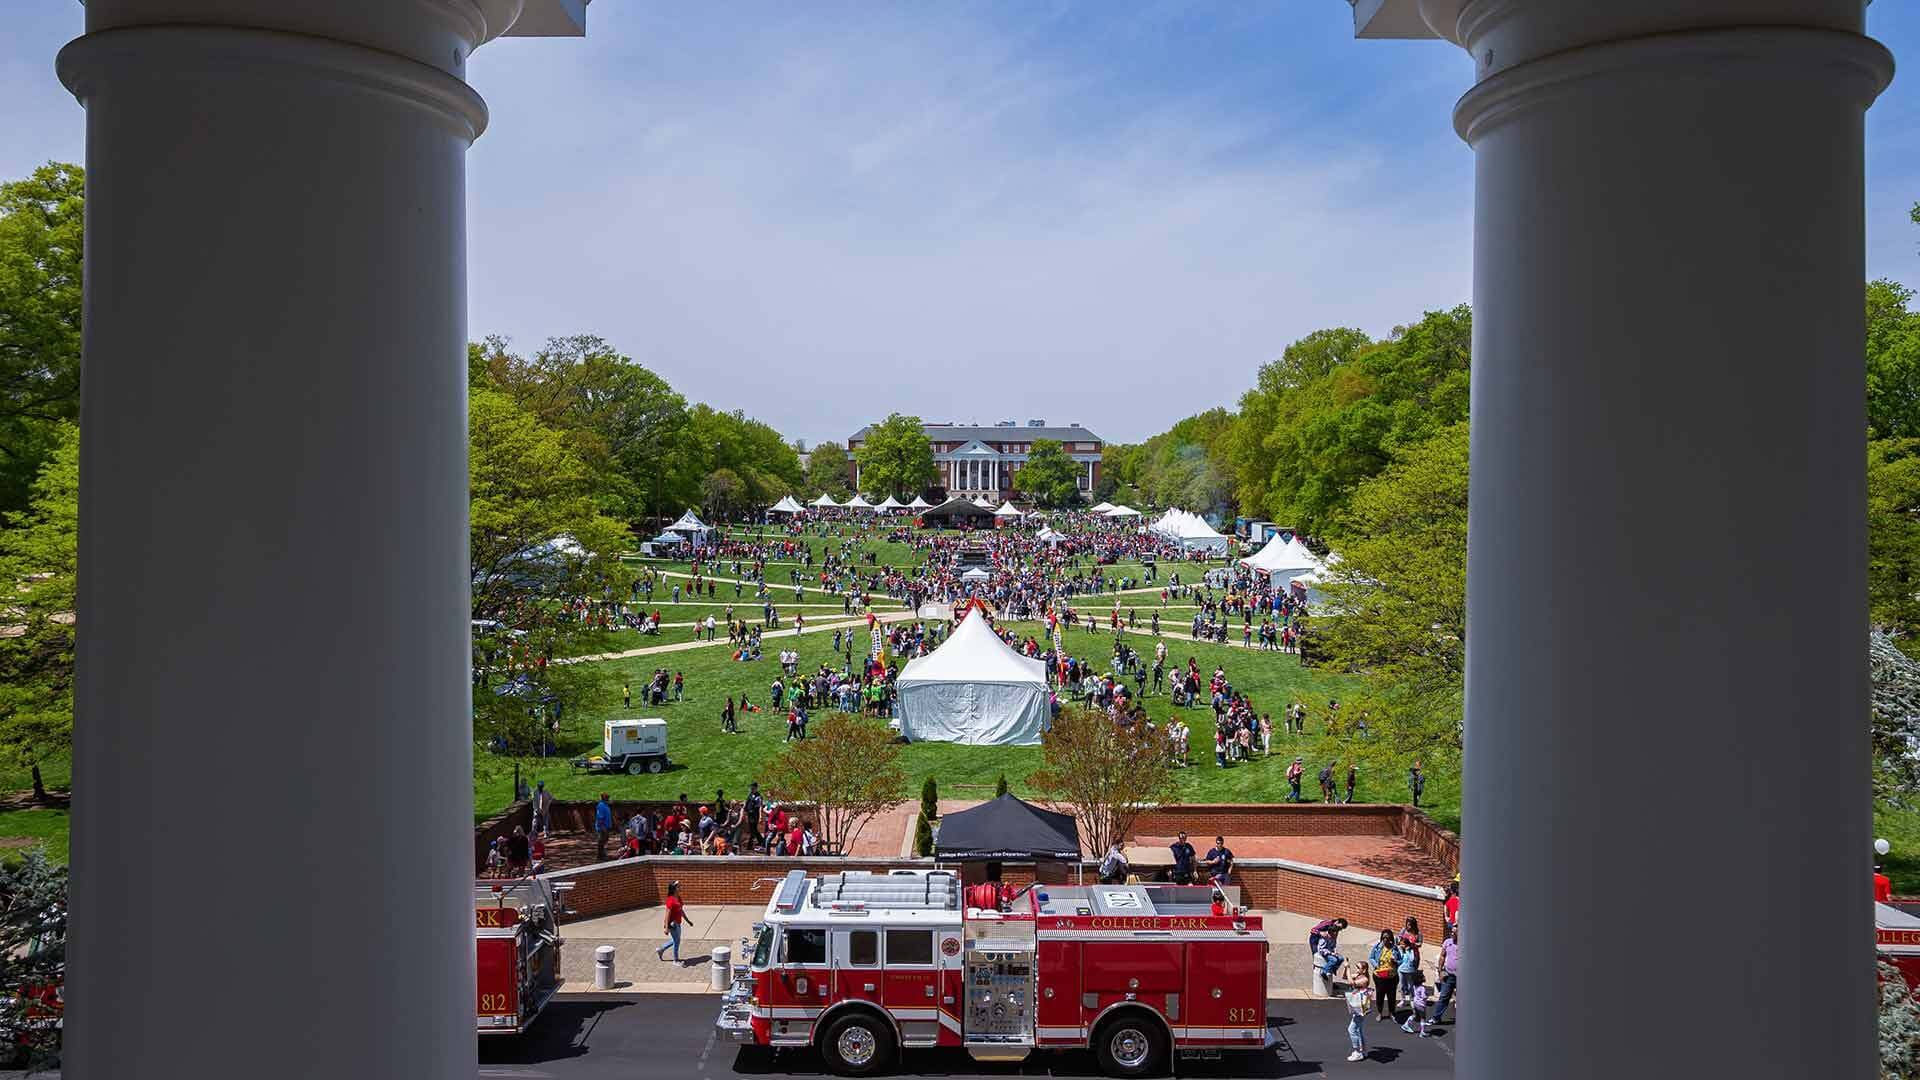 Firetruck with Maryland Day tents and crowd on McKeldin Mall in background